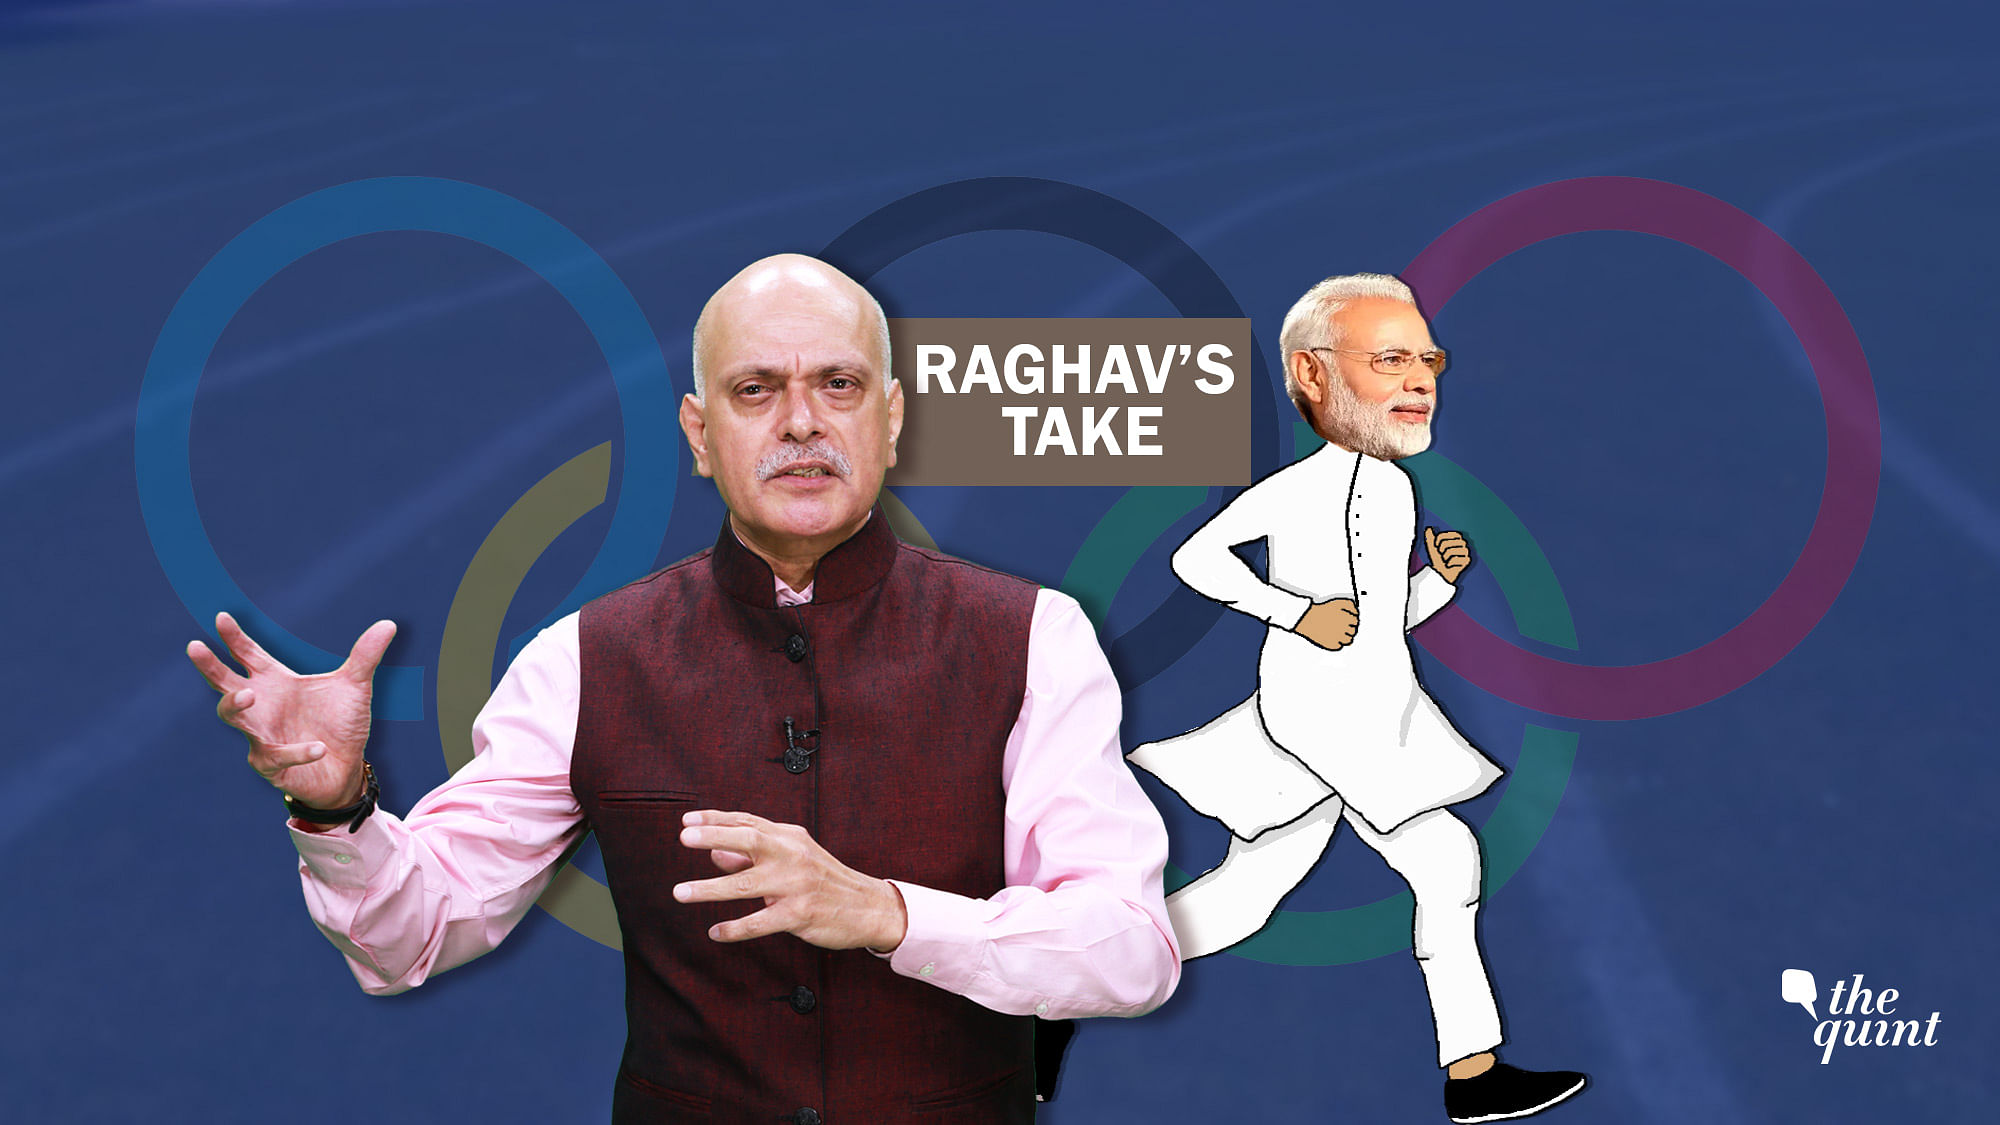 Prime Minister Modi is a political decathlete. Winning a single sprint or marathon does not cut it for him.